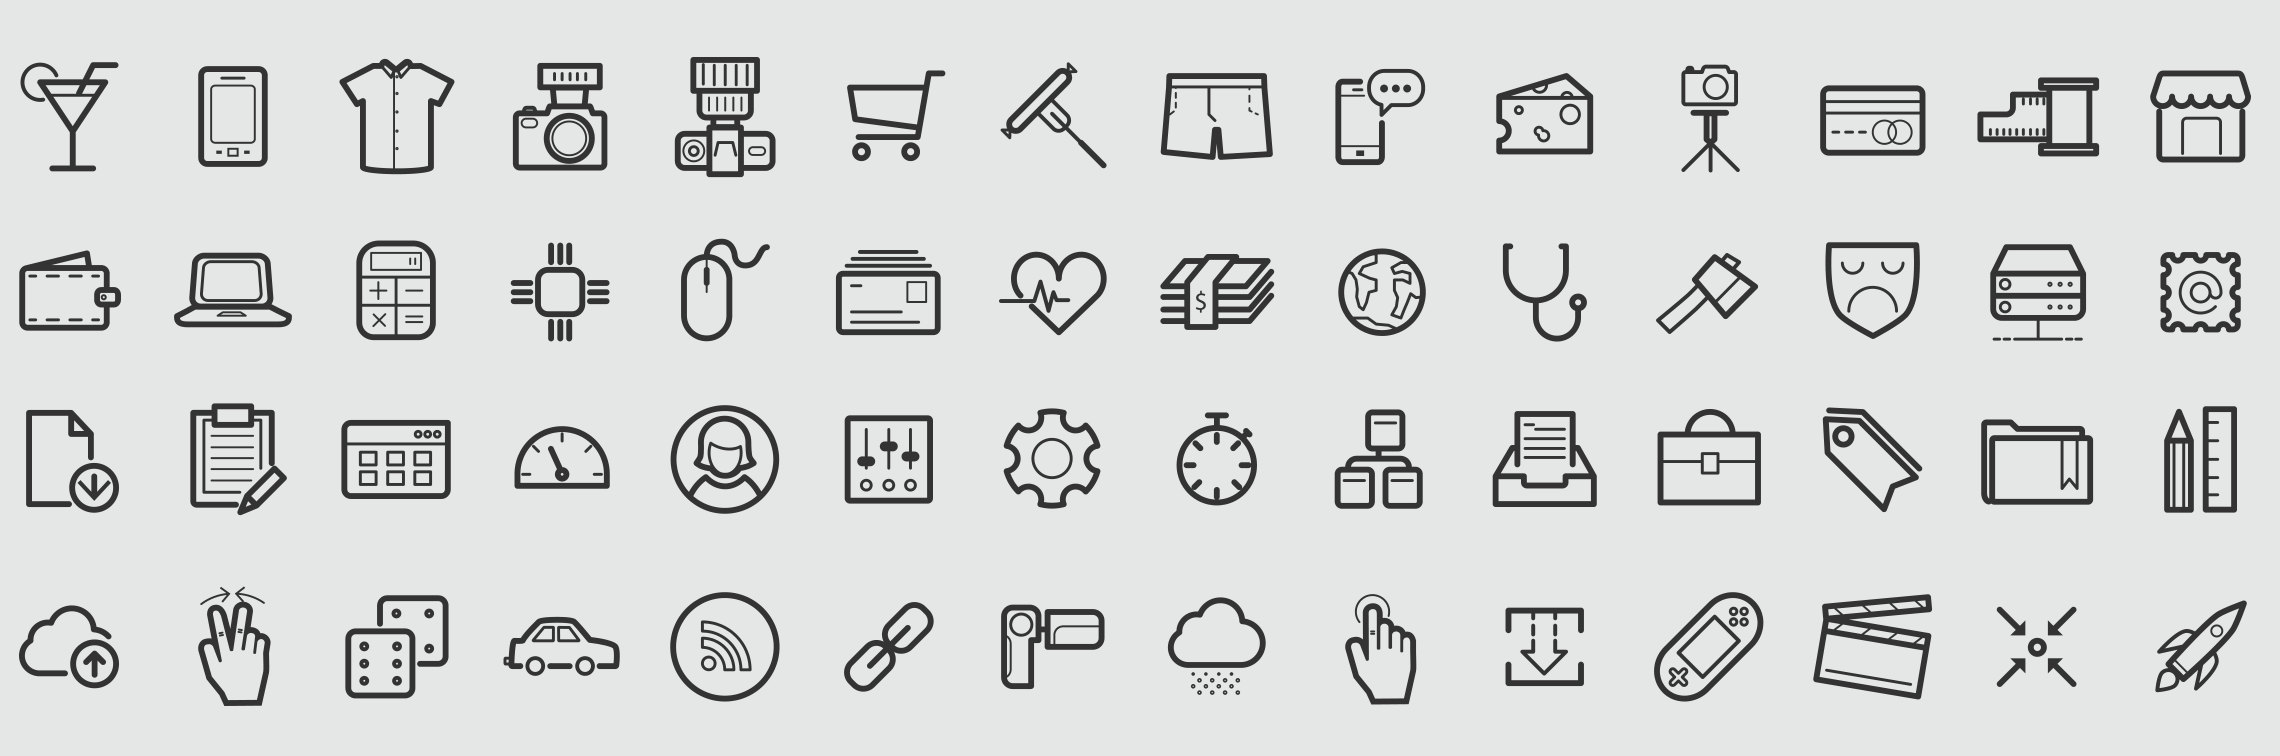 outline-icons-vector-set.png